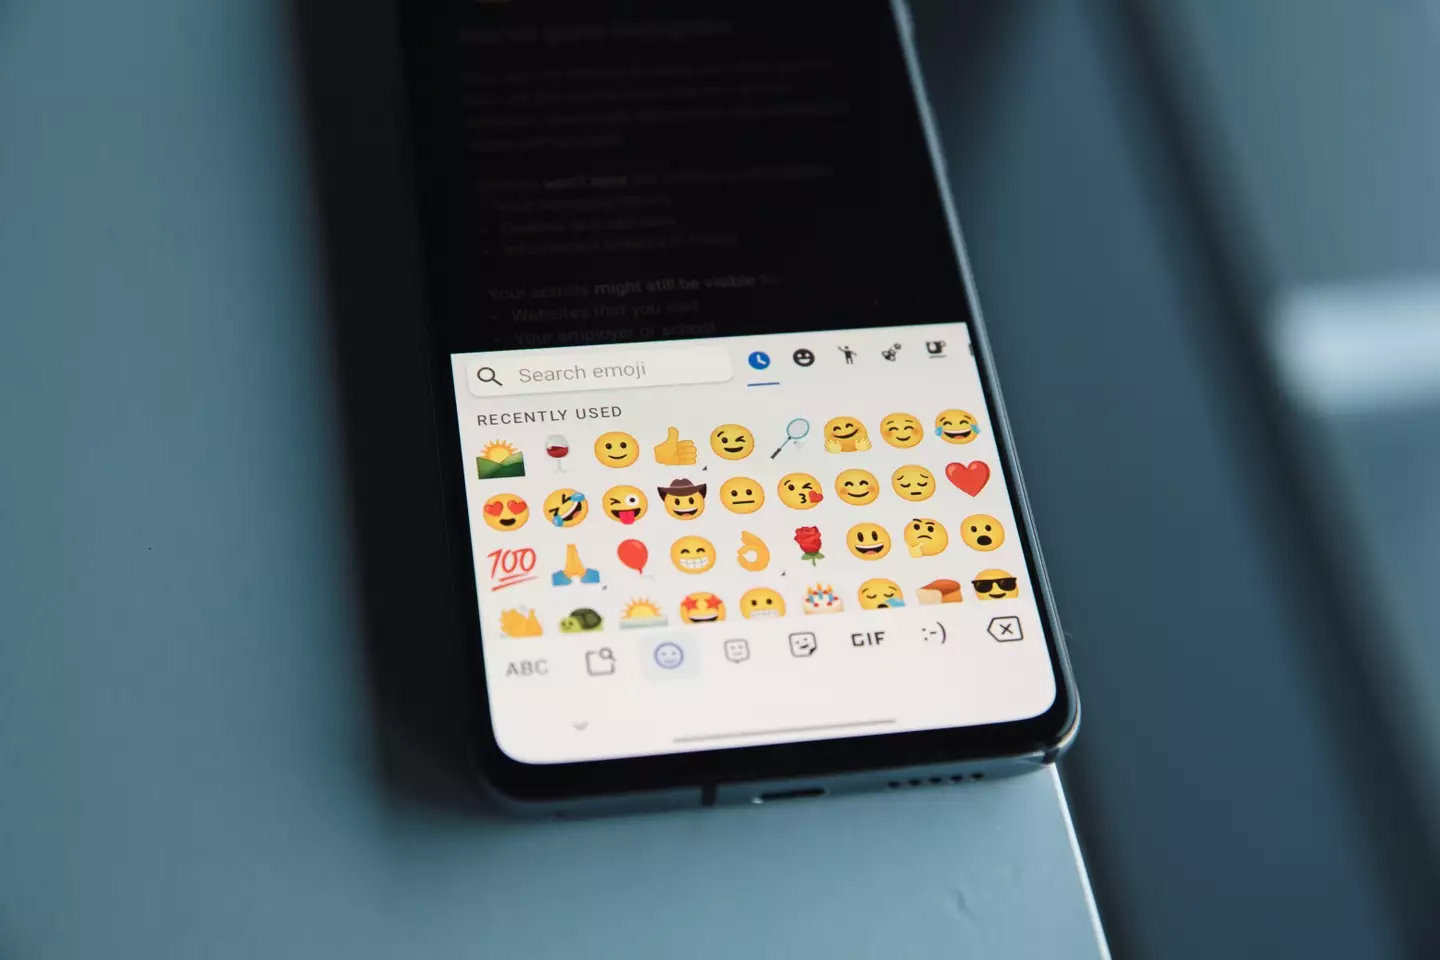 A Canadian judge ruled that the thumbs-up emoji was a digital signature.